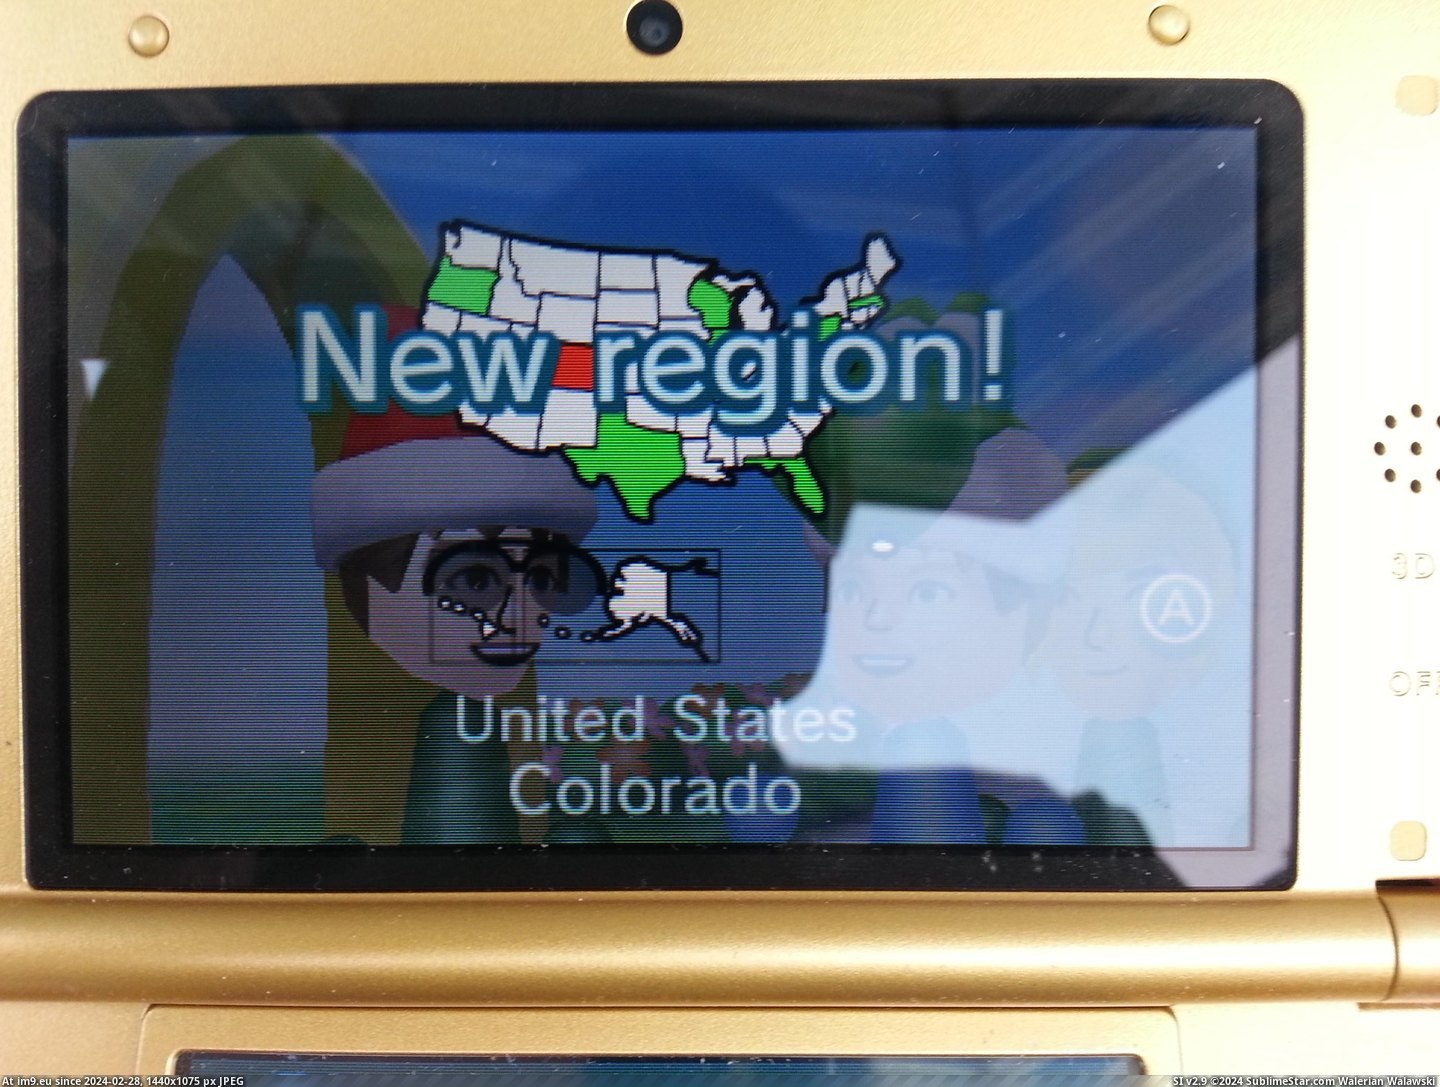 #Gaming #World #Carry #Spotpass #Disney #3ds [Gaming] This is what happens when you carry around your 3DS and spotpass in Disney World 19 Pic. (Bild von album My r/GAMING favs))